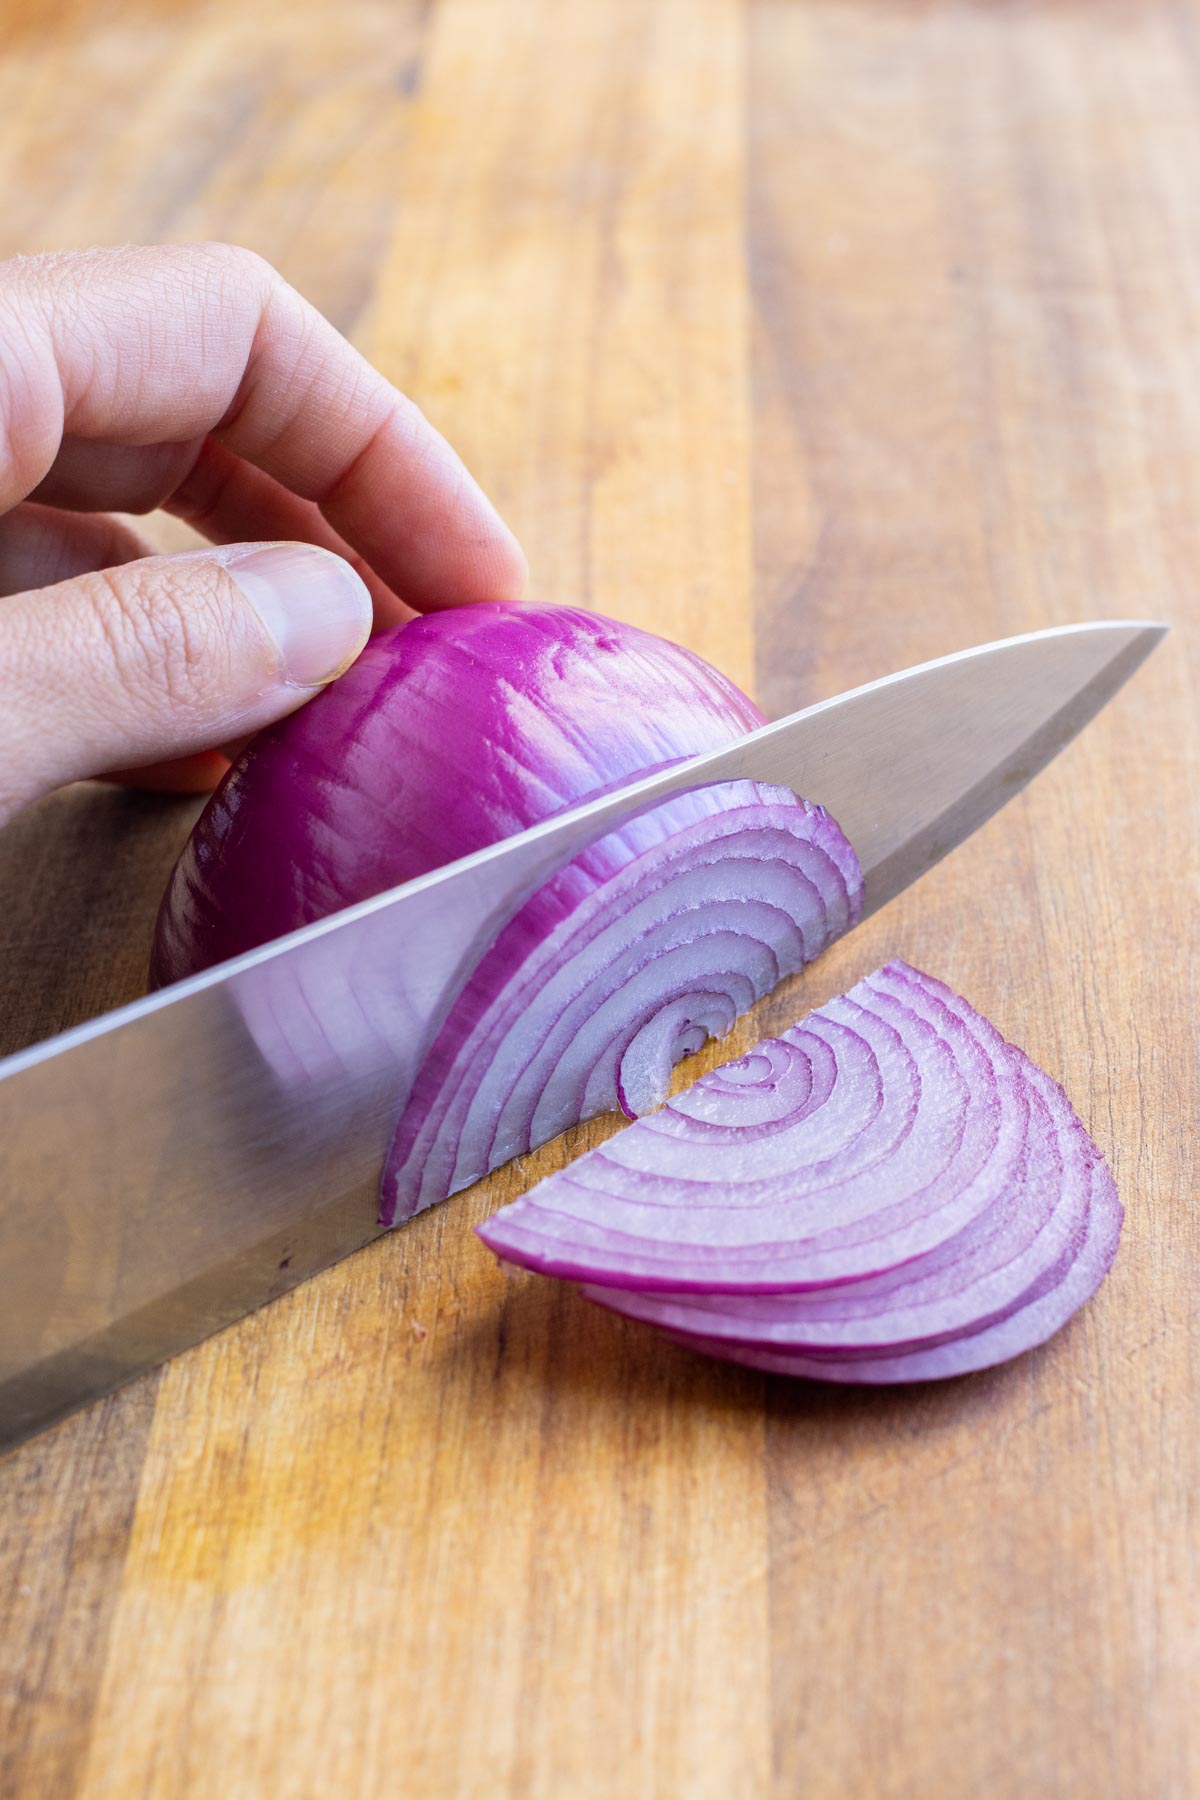 A knife thinly slices a red onion.